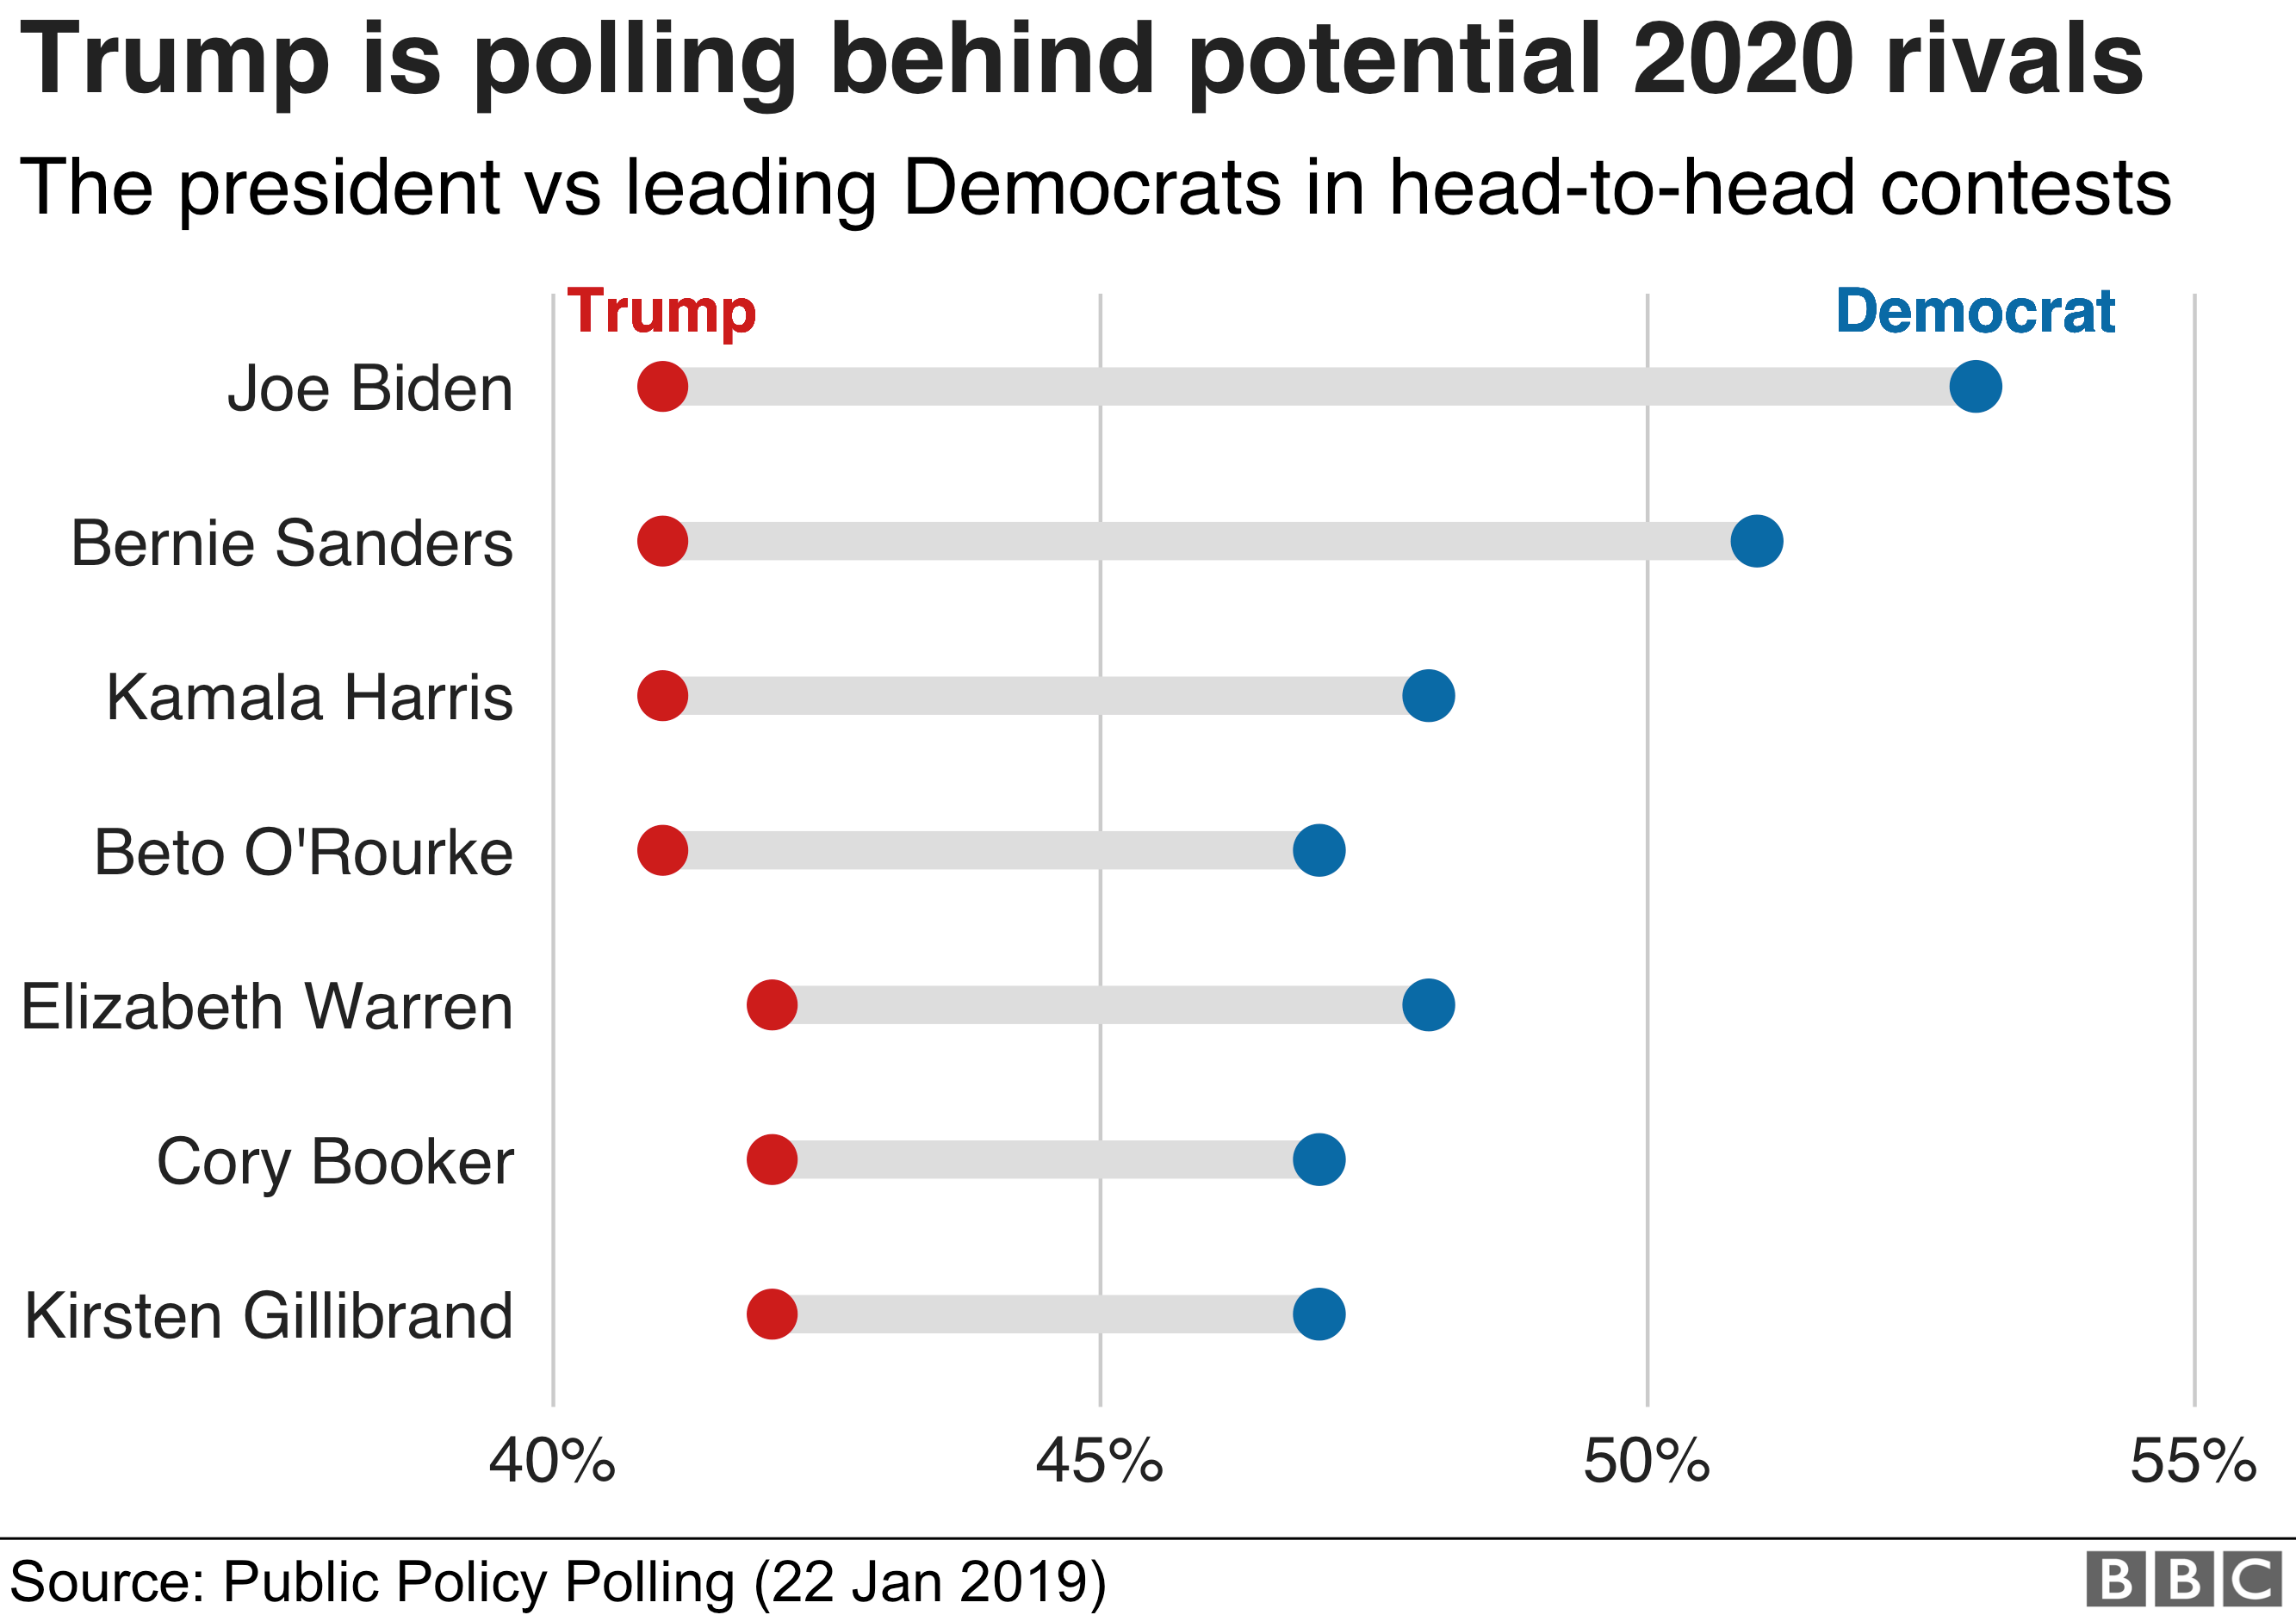 Chart showing how Donald Trump would fare against potential Democratic rivals in the 2020 election